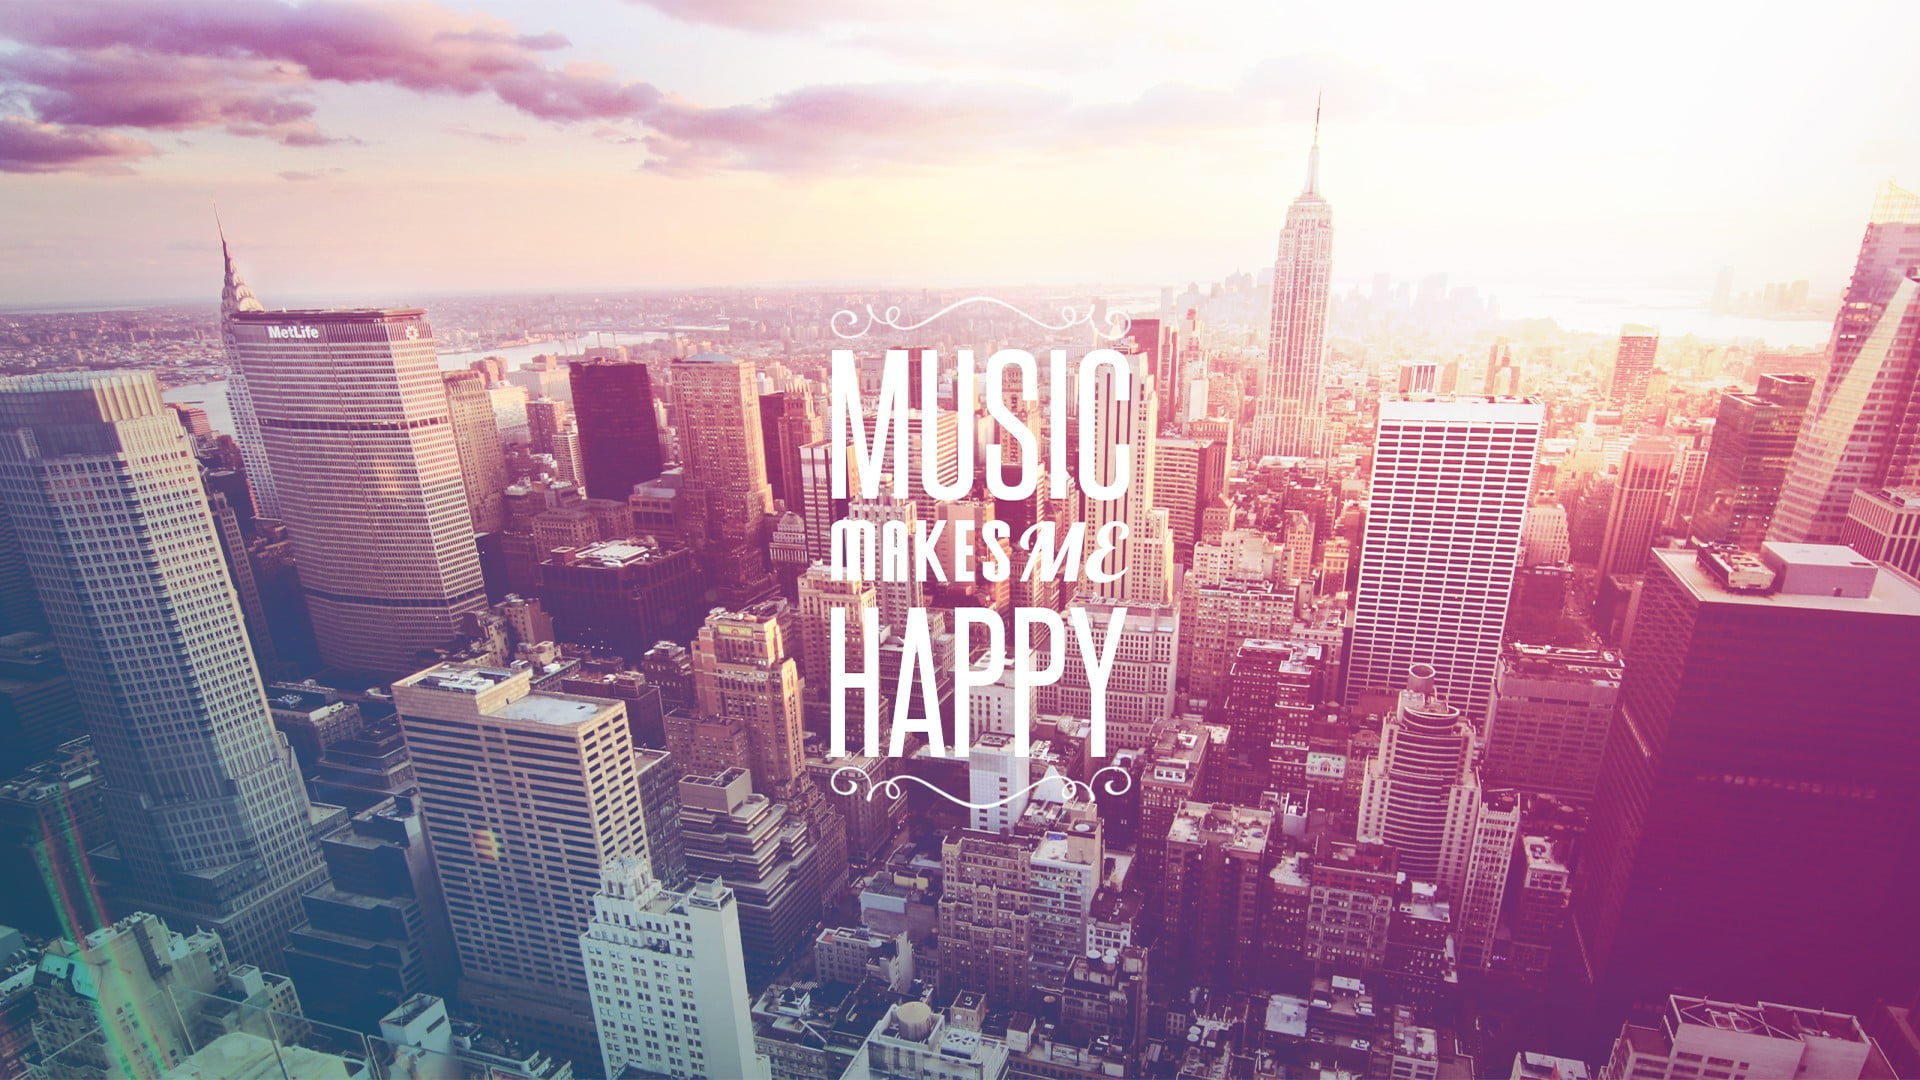 Wallpaper Music Makes Me Happy poster, city skyline illustration with Music makes me happy text overlay